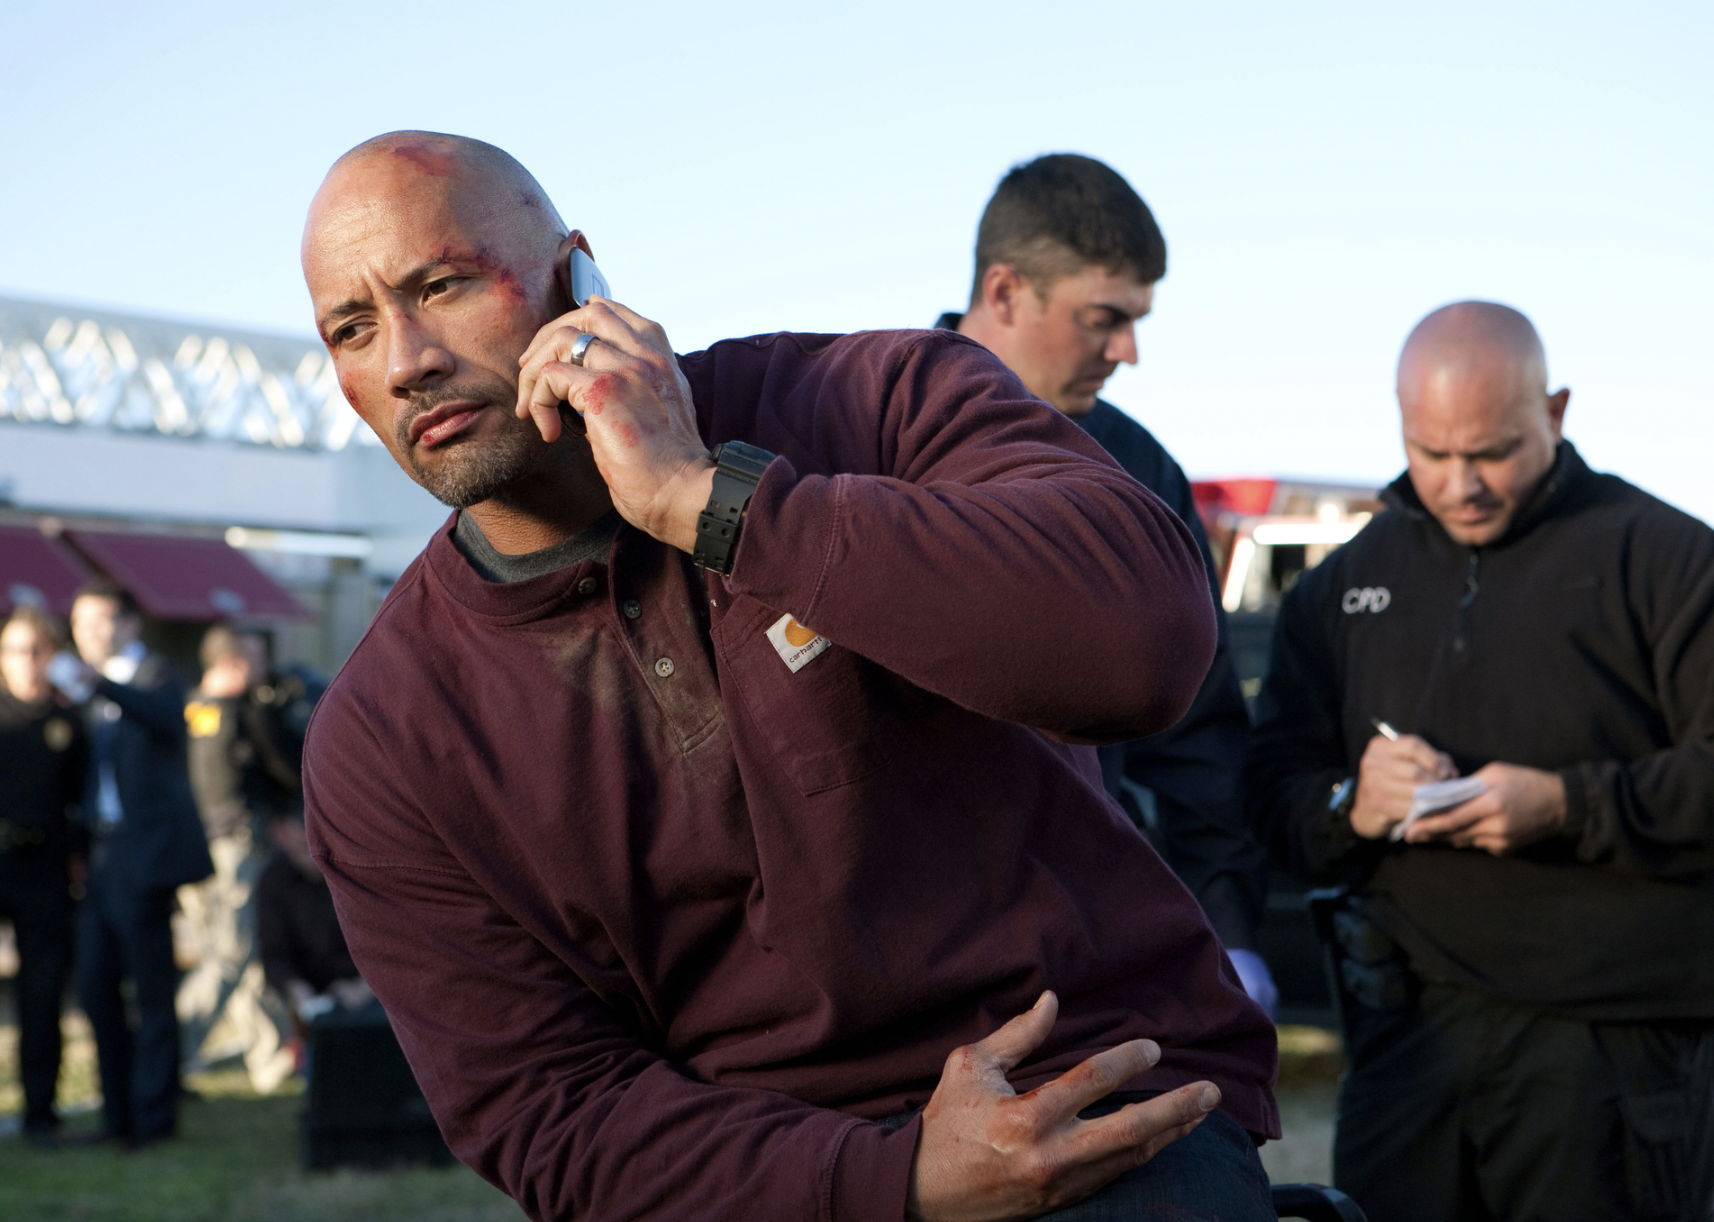 Dwayne Johnson in a scene from "Snitch"